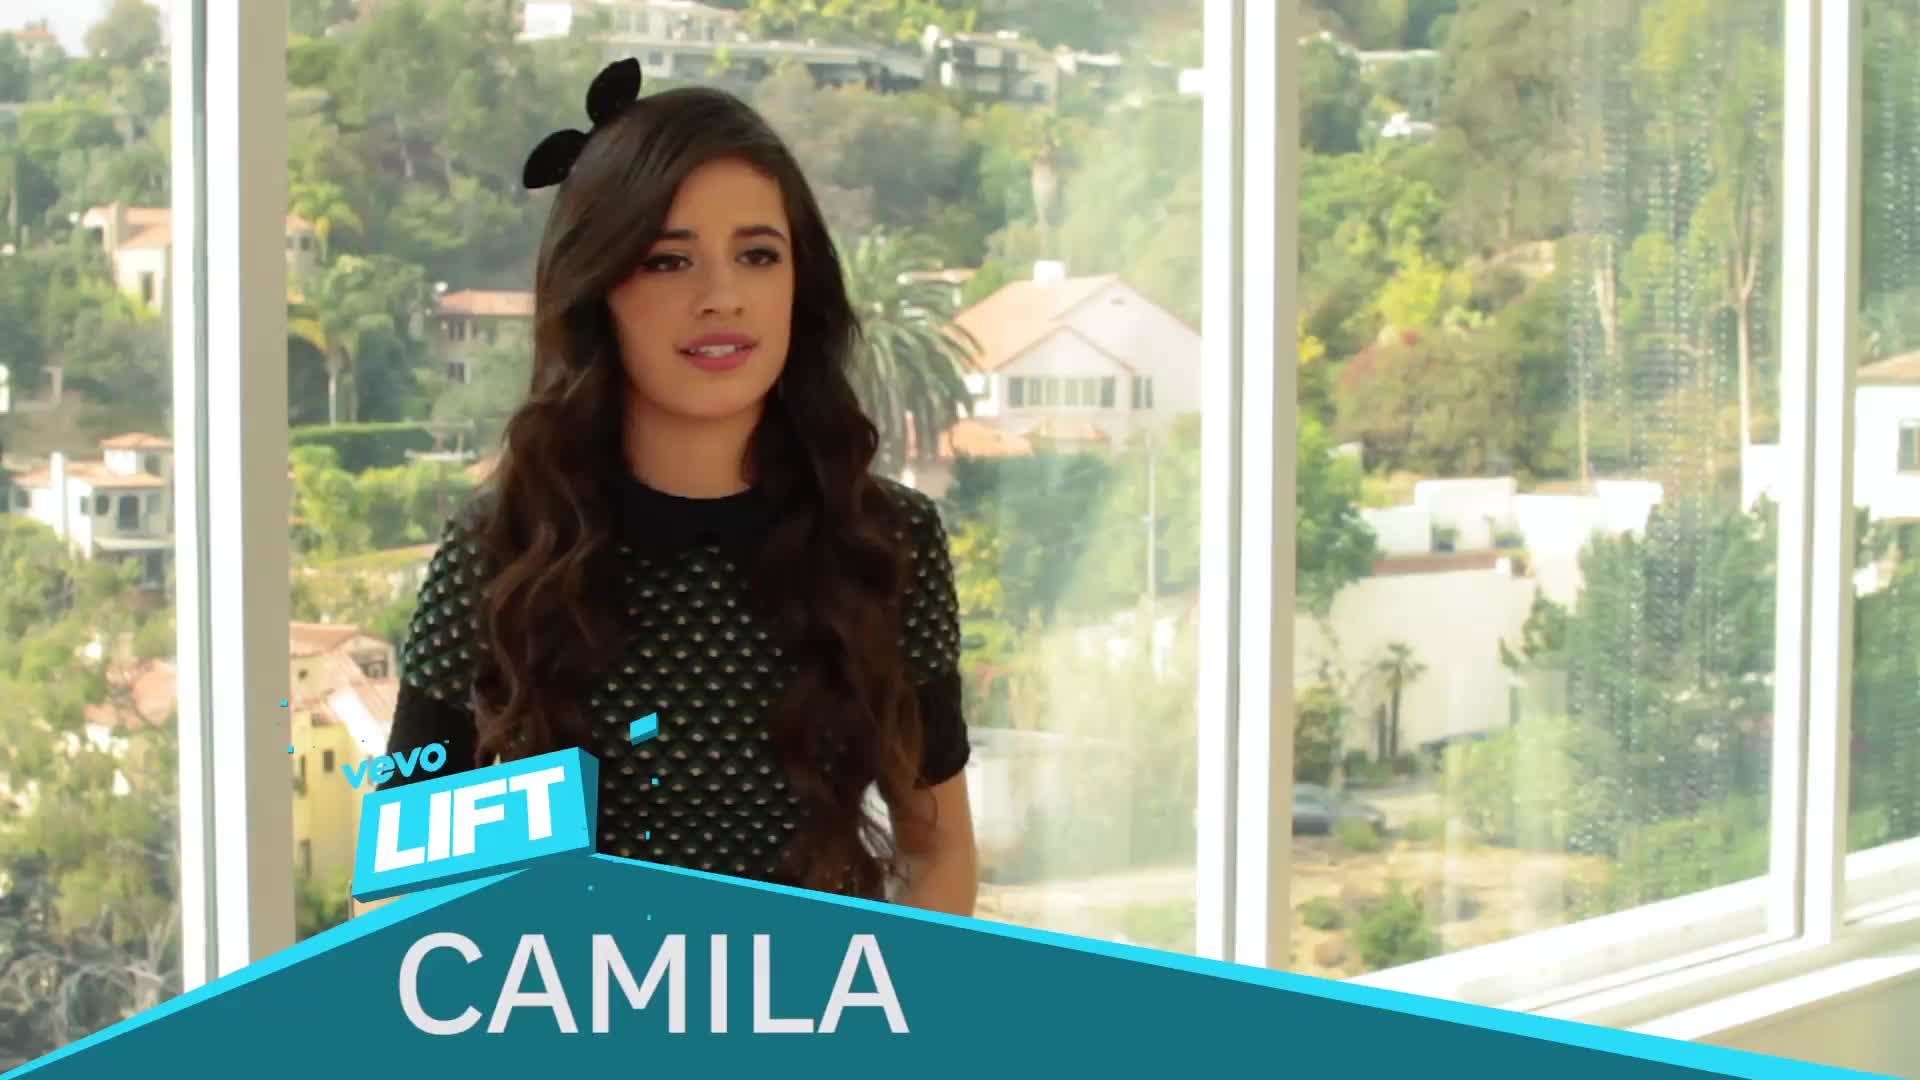 1920x1080 Fifth Harmony - Get To Know: Camila (Vevo Lift): Brought To You